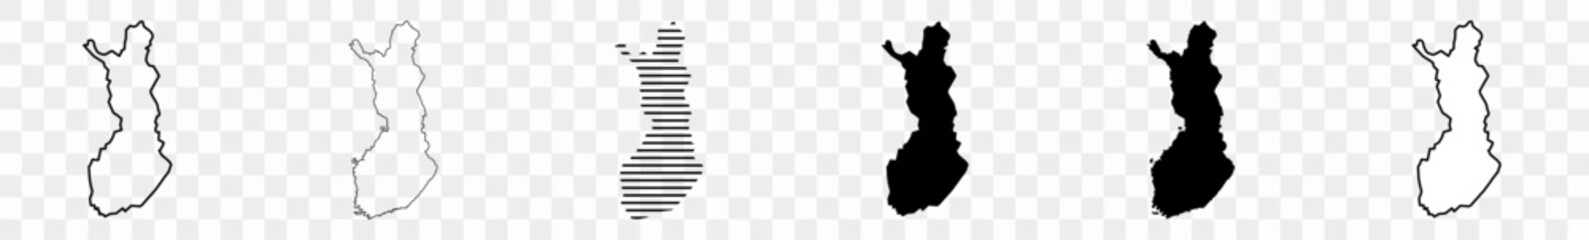 Finland Map Black | Finnish Border | State Country | Transparent Isolated | Variations